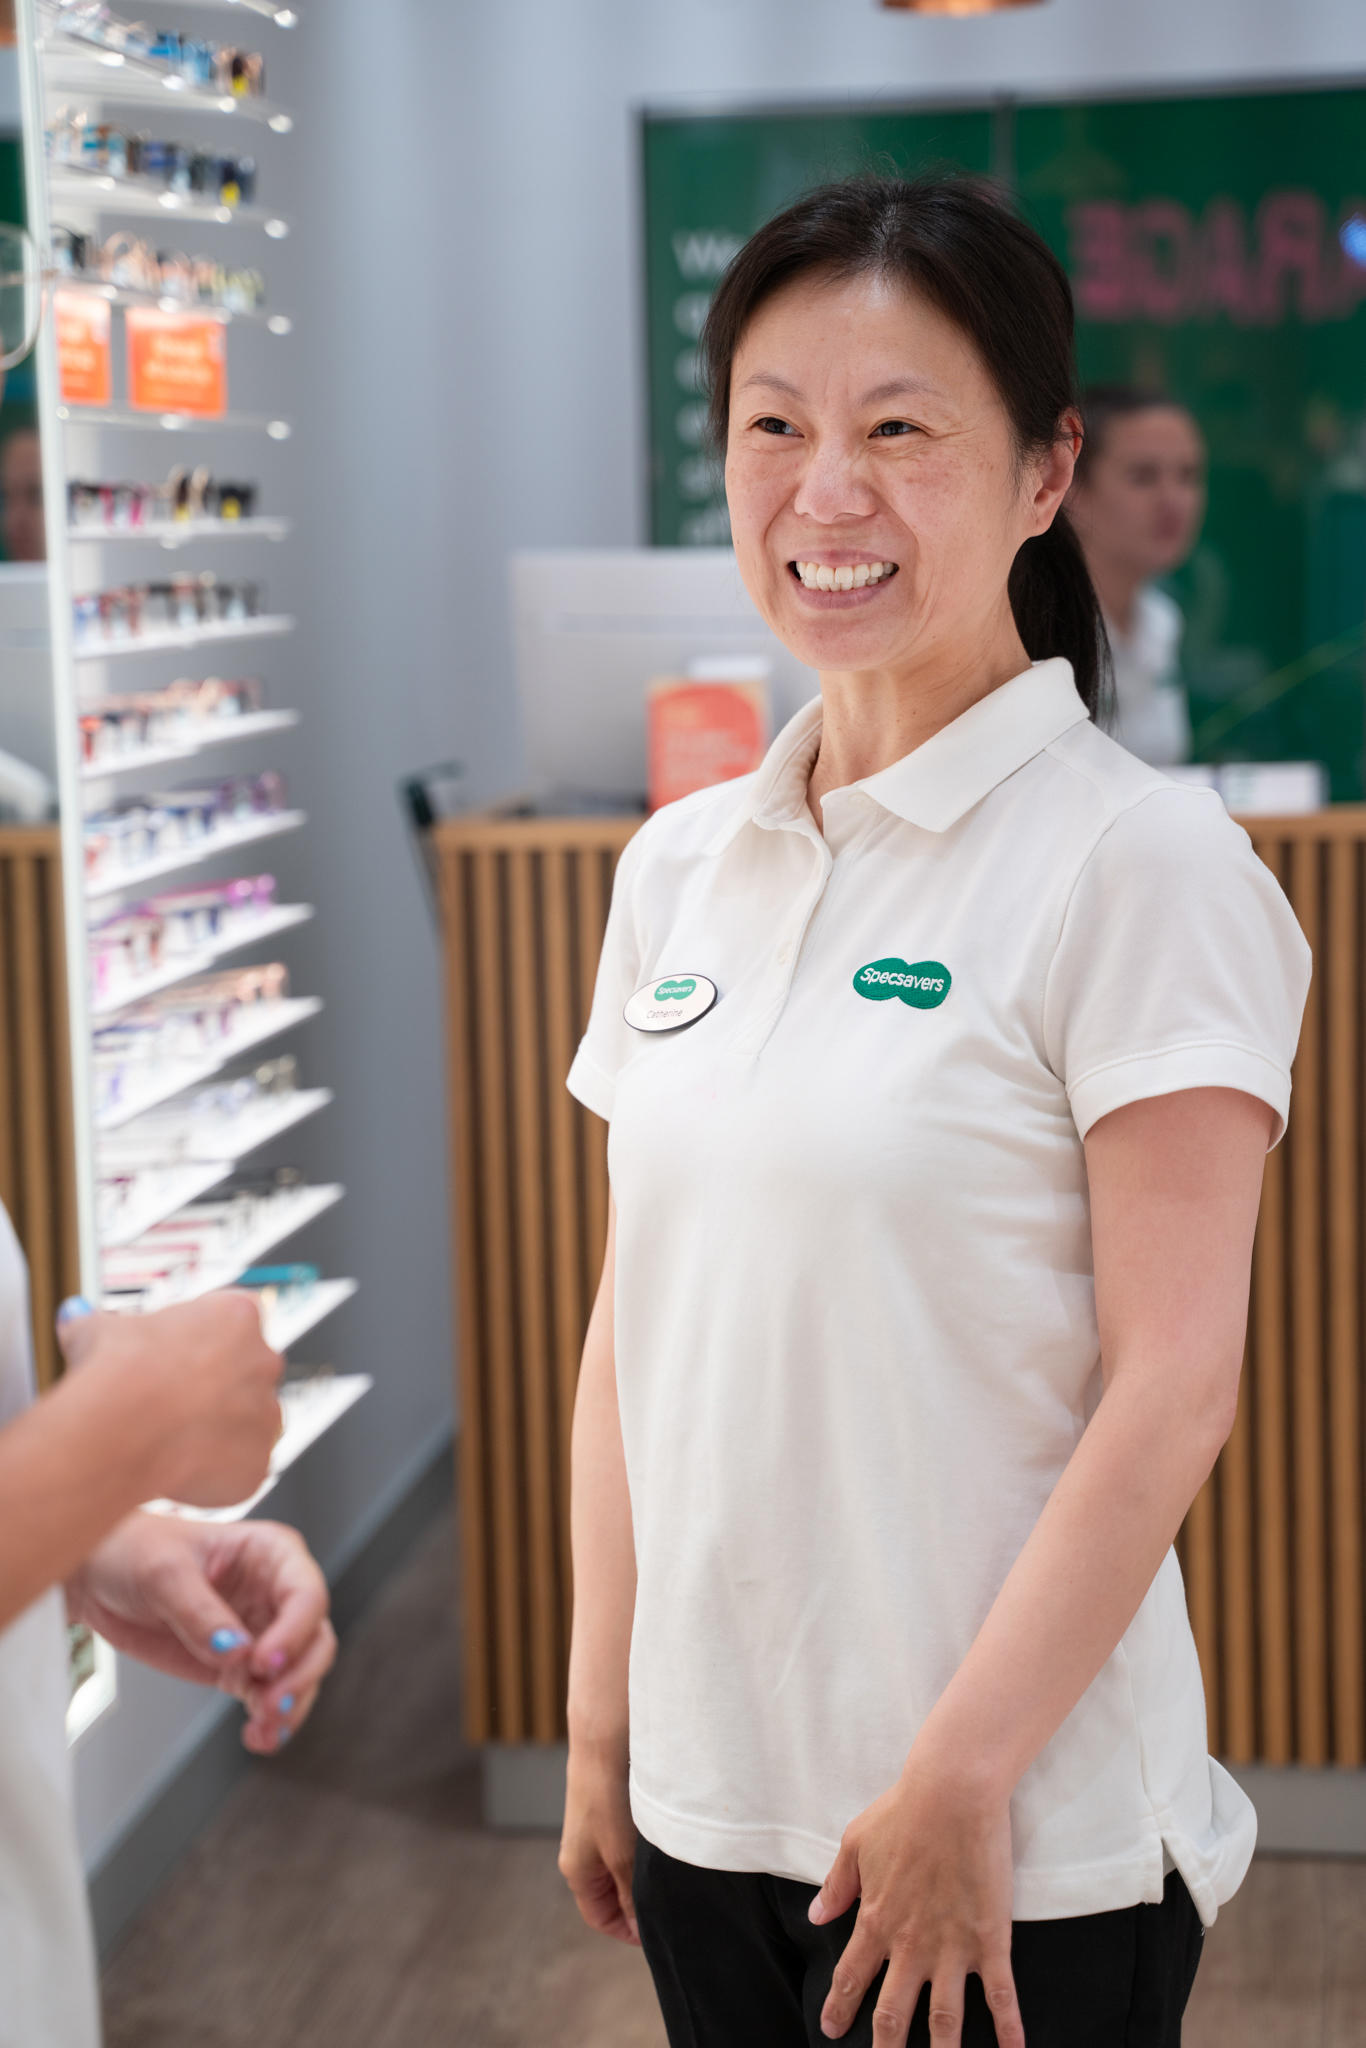 Images Specsavers Dufferin Mall